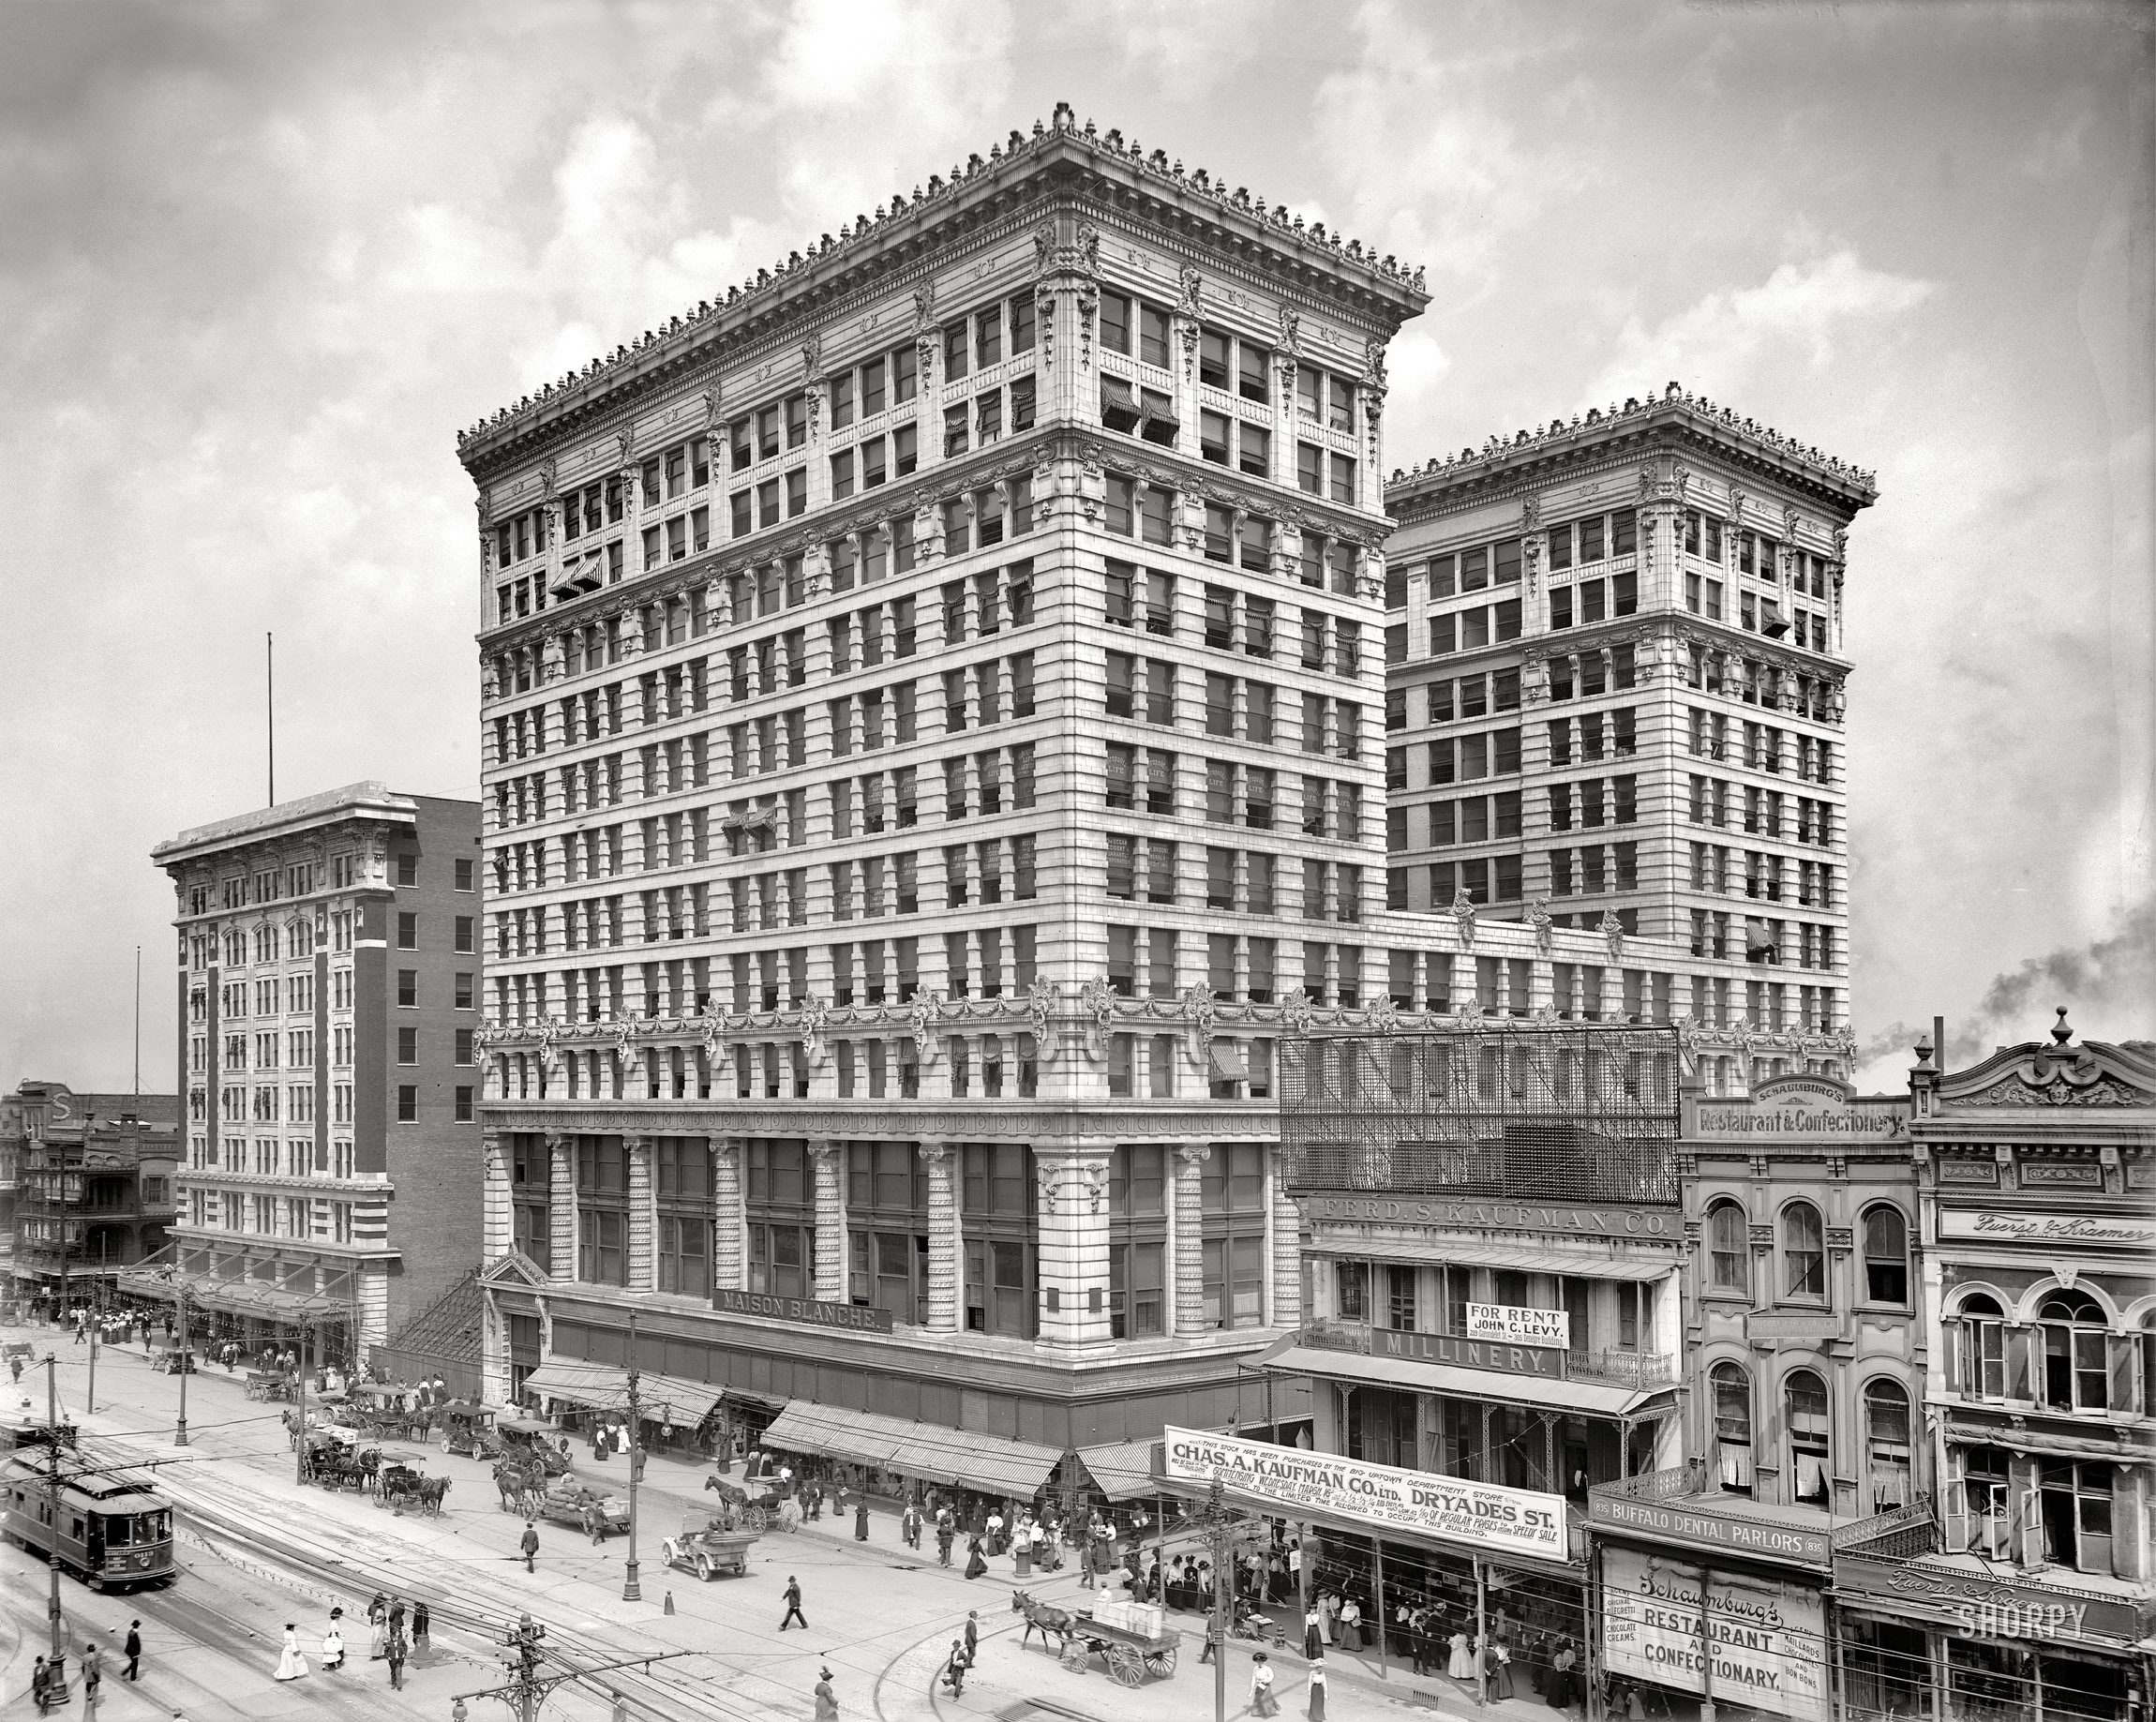 New Orleans in 1910. "Maison Blanche, Canal Street." Continuing our tour of Crescent City retailers. 8x10 inch glass negative. View full size.